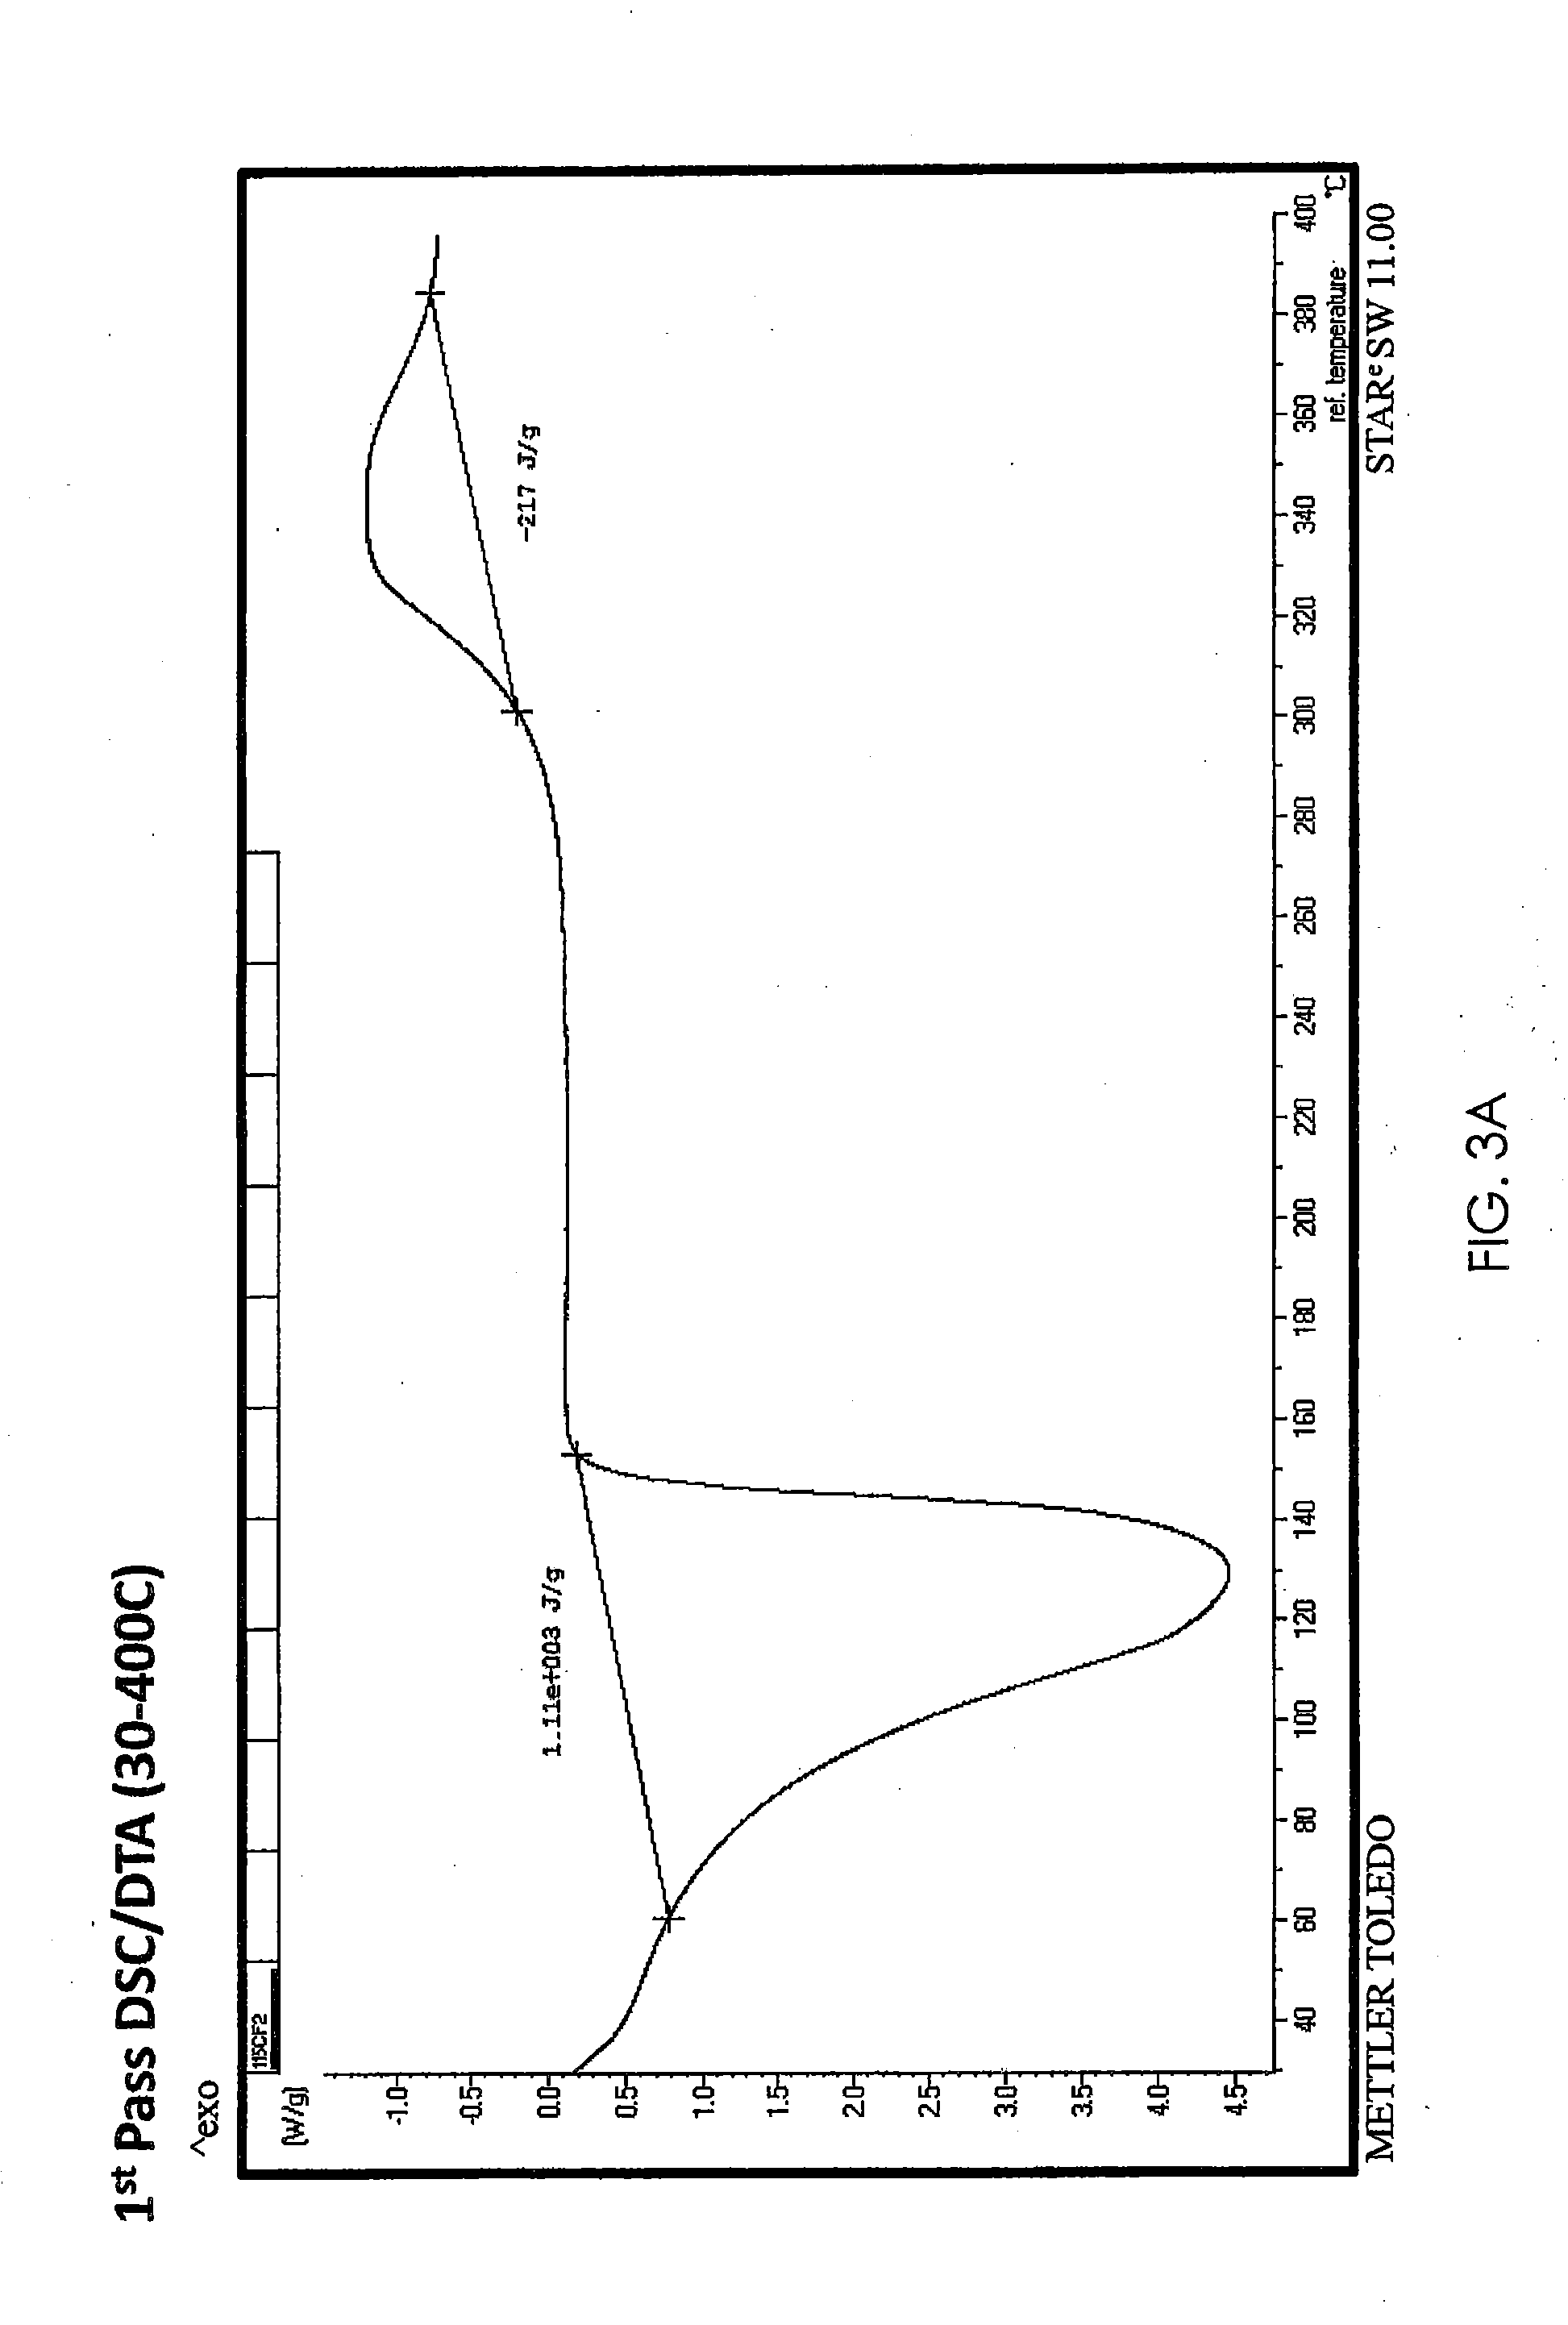 Method for isolating cellulose from a biomass and products provided therefrom